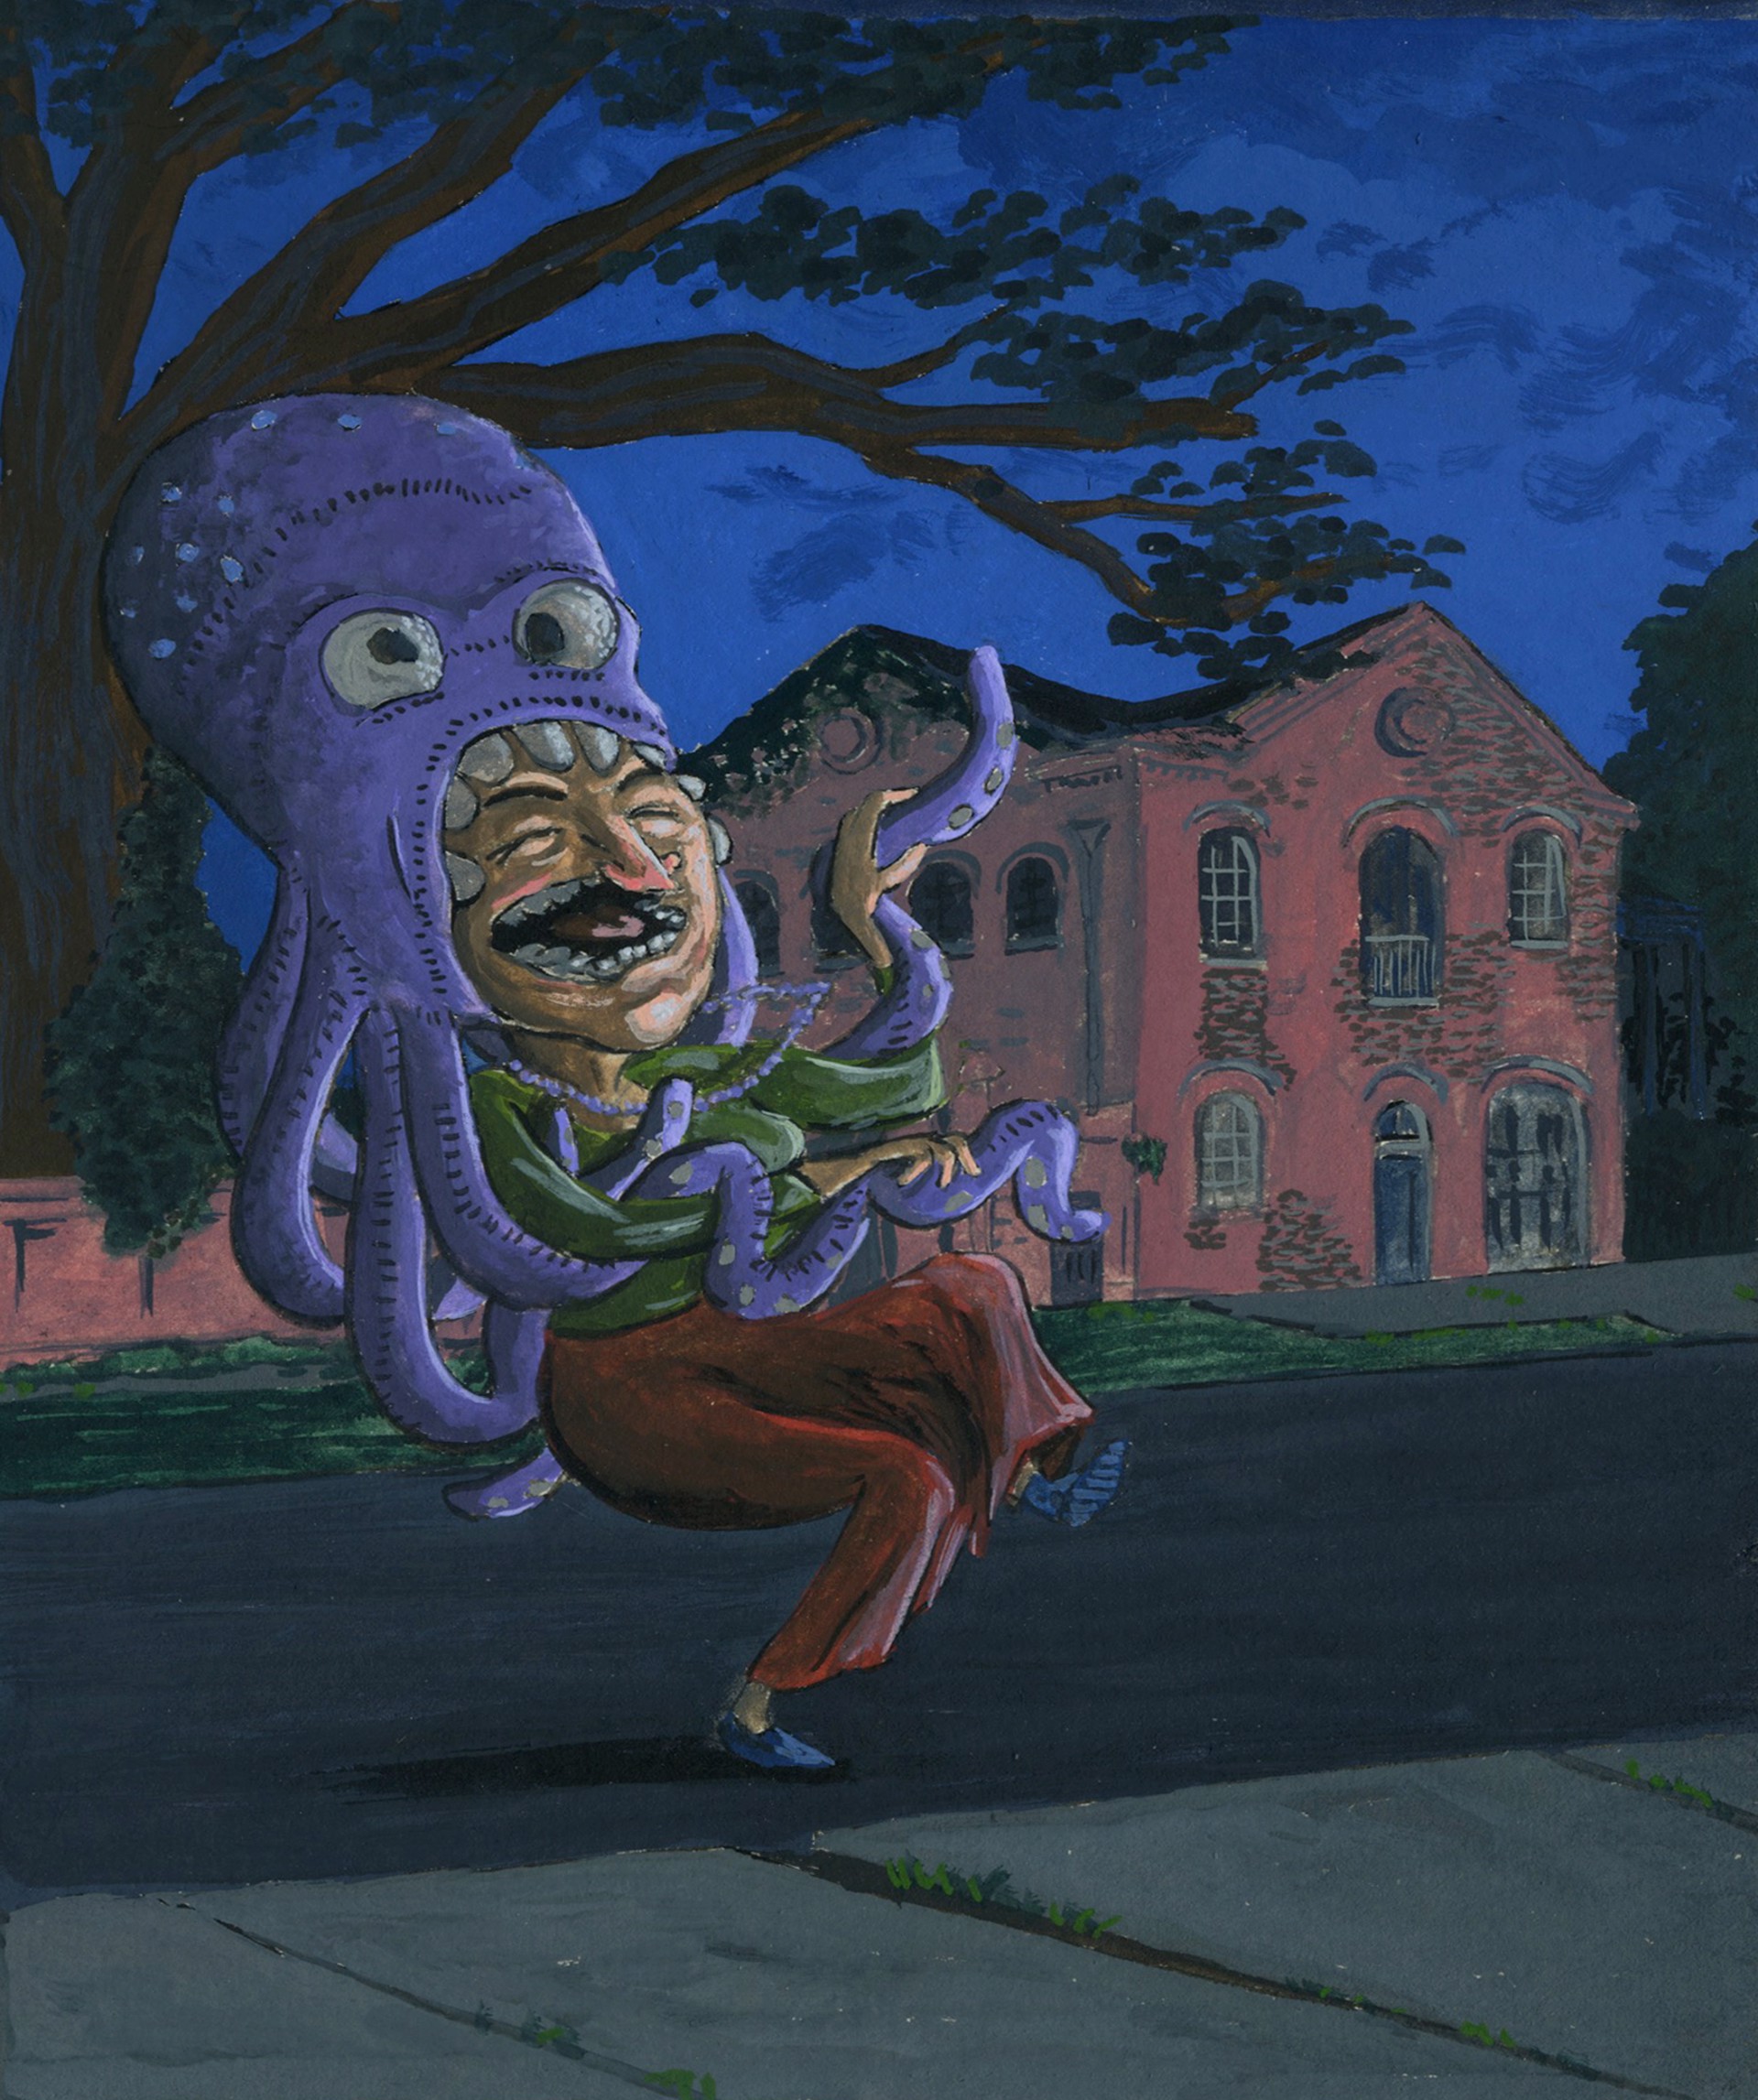 An Octopus Costume on Chestnut by First Street by Jeff Pastorek